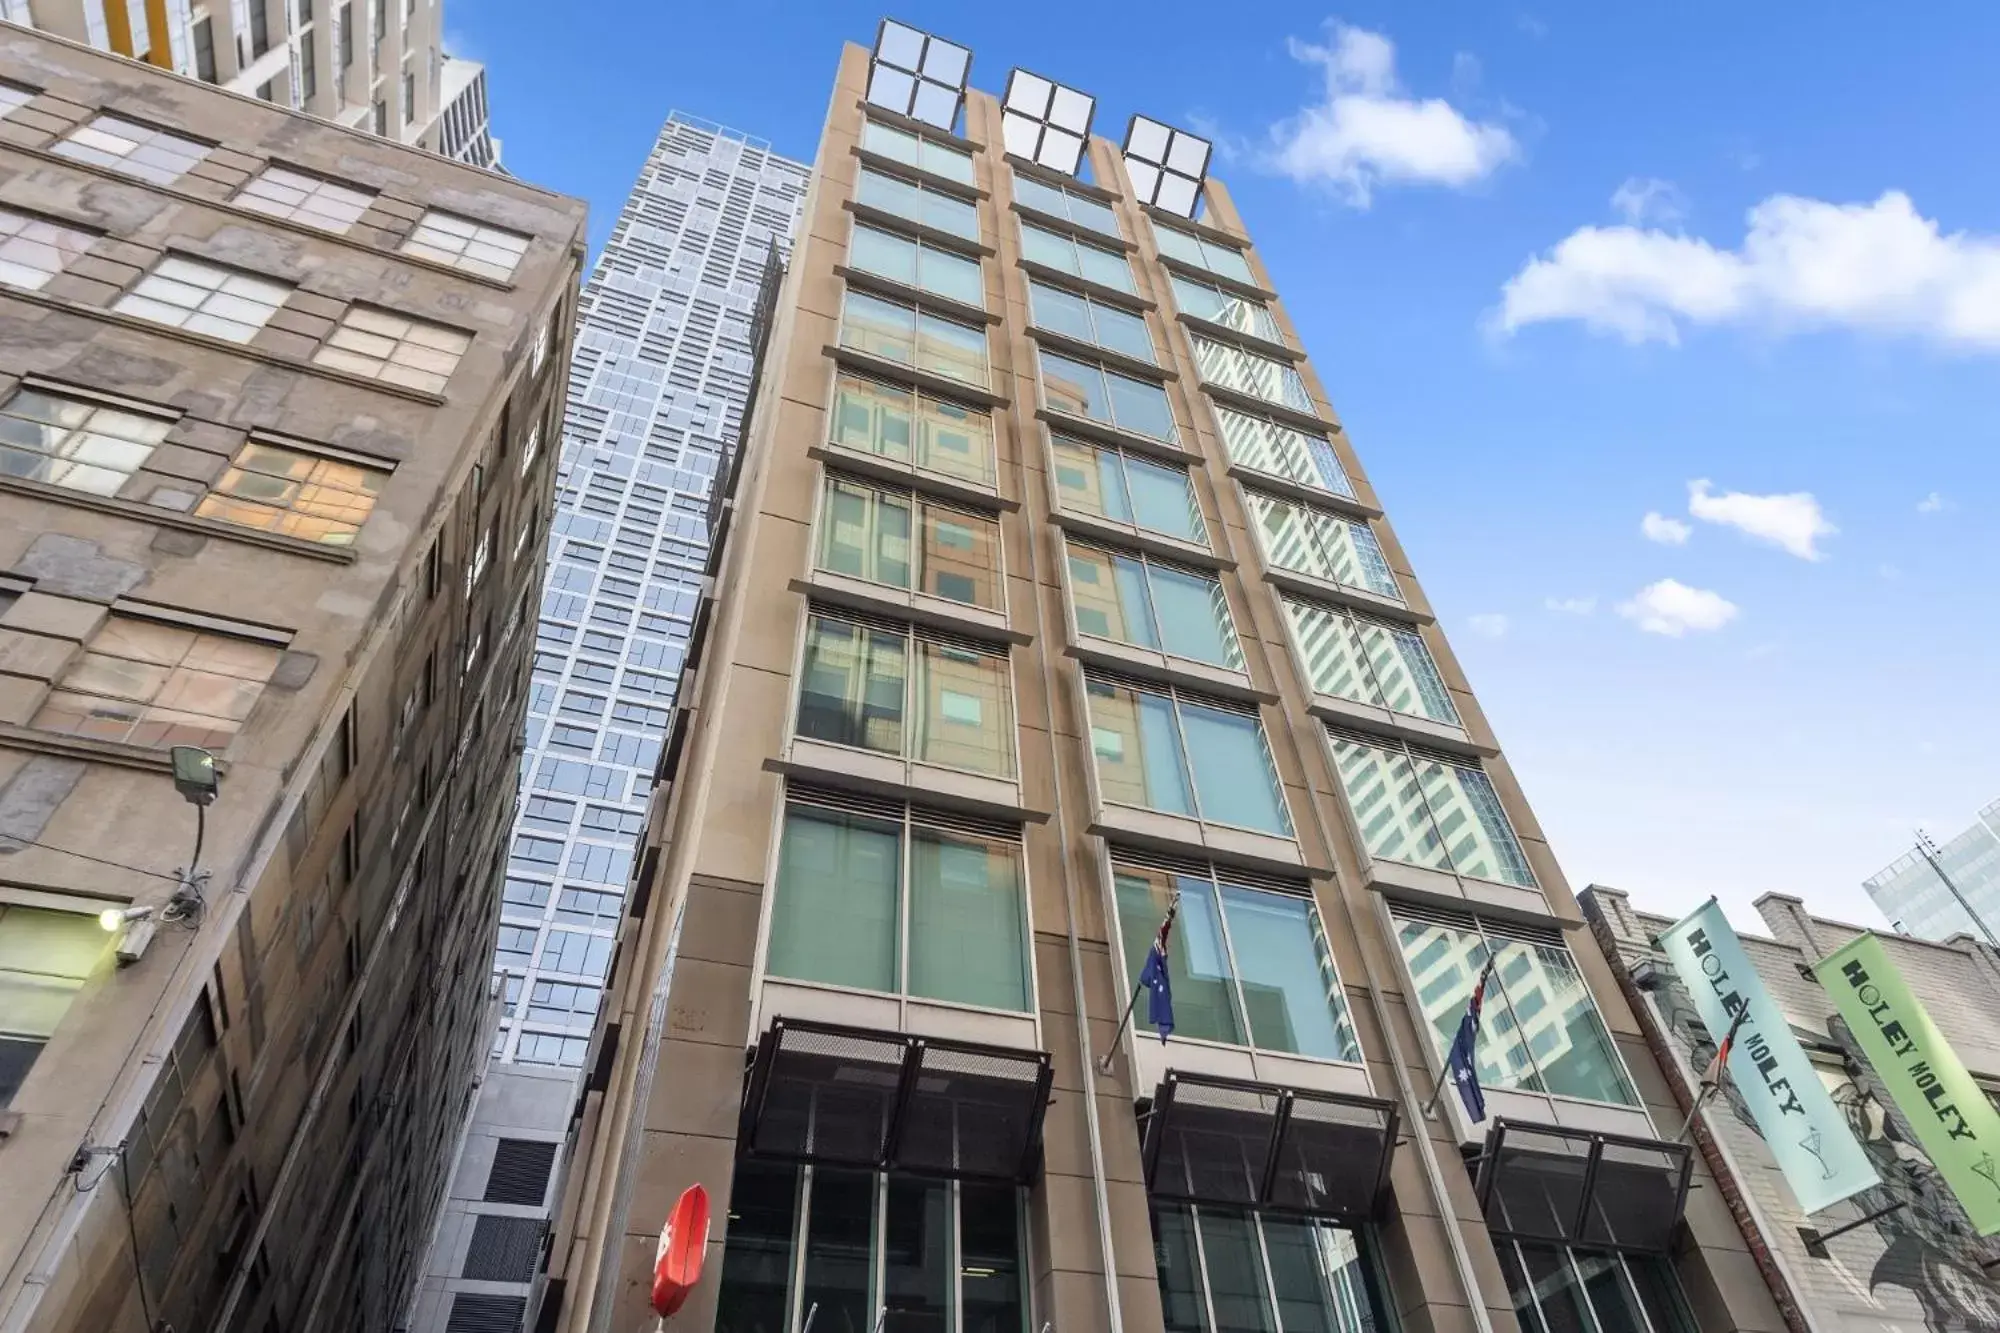 Property Building in YEHS Hotel Melbourne CBD